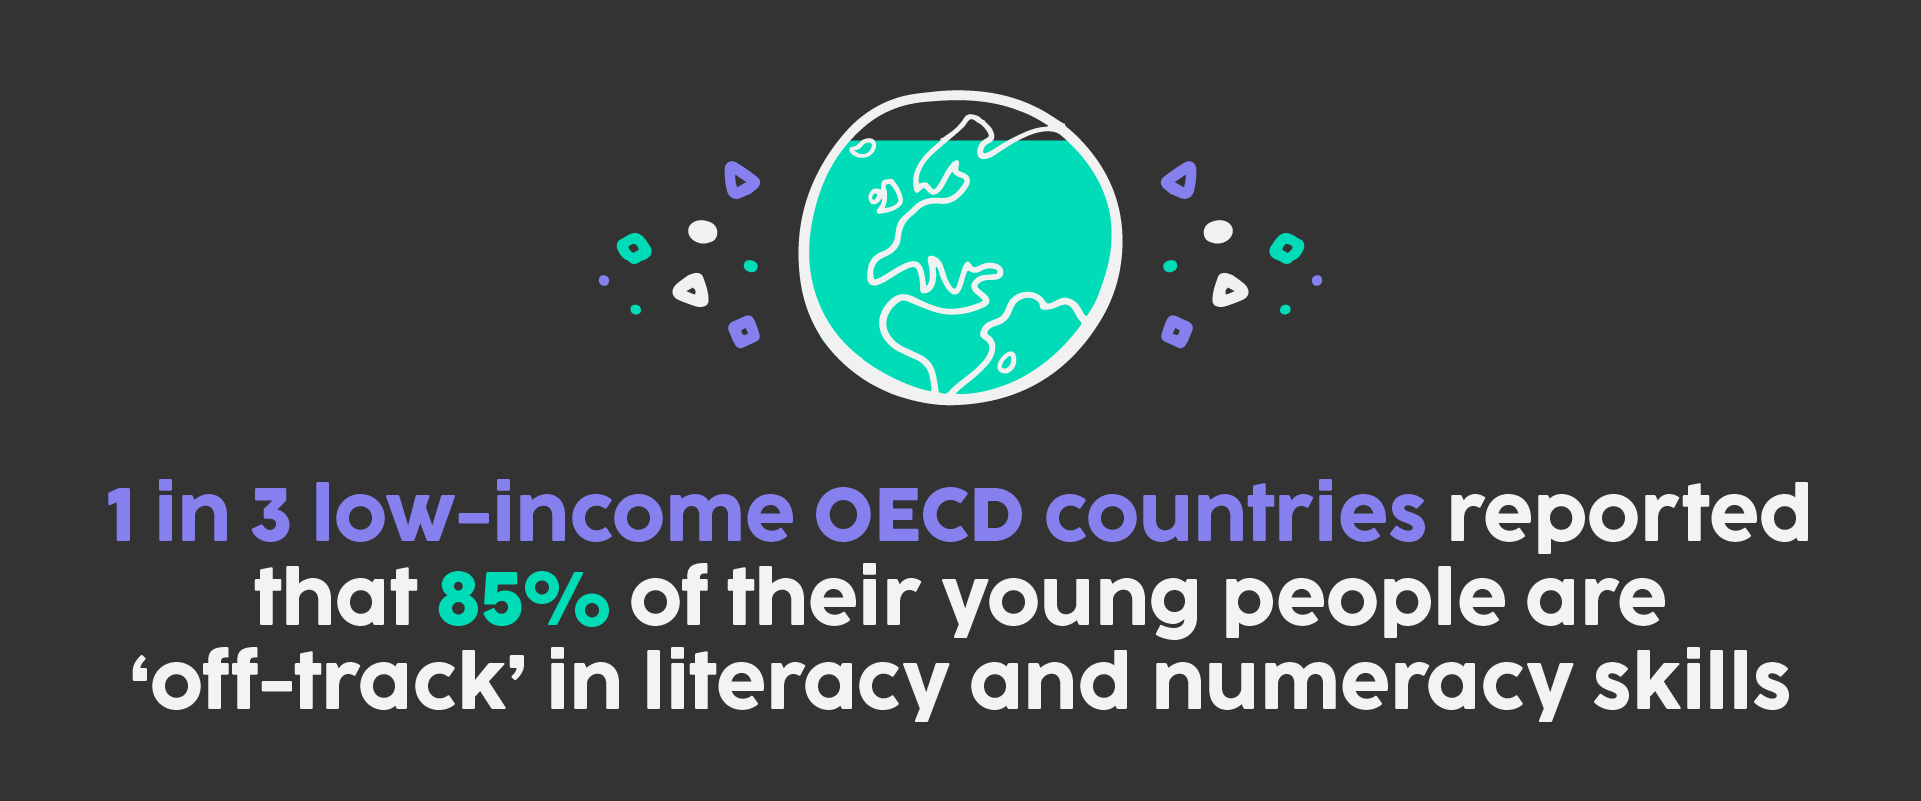 low income OECD countries Maths and English skills